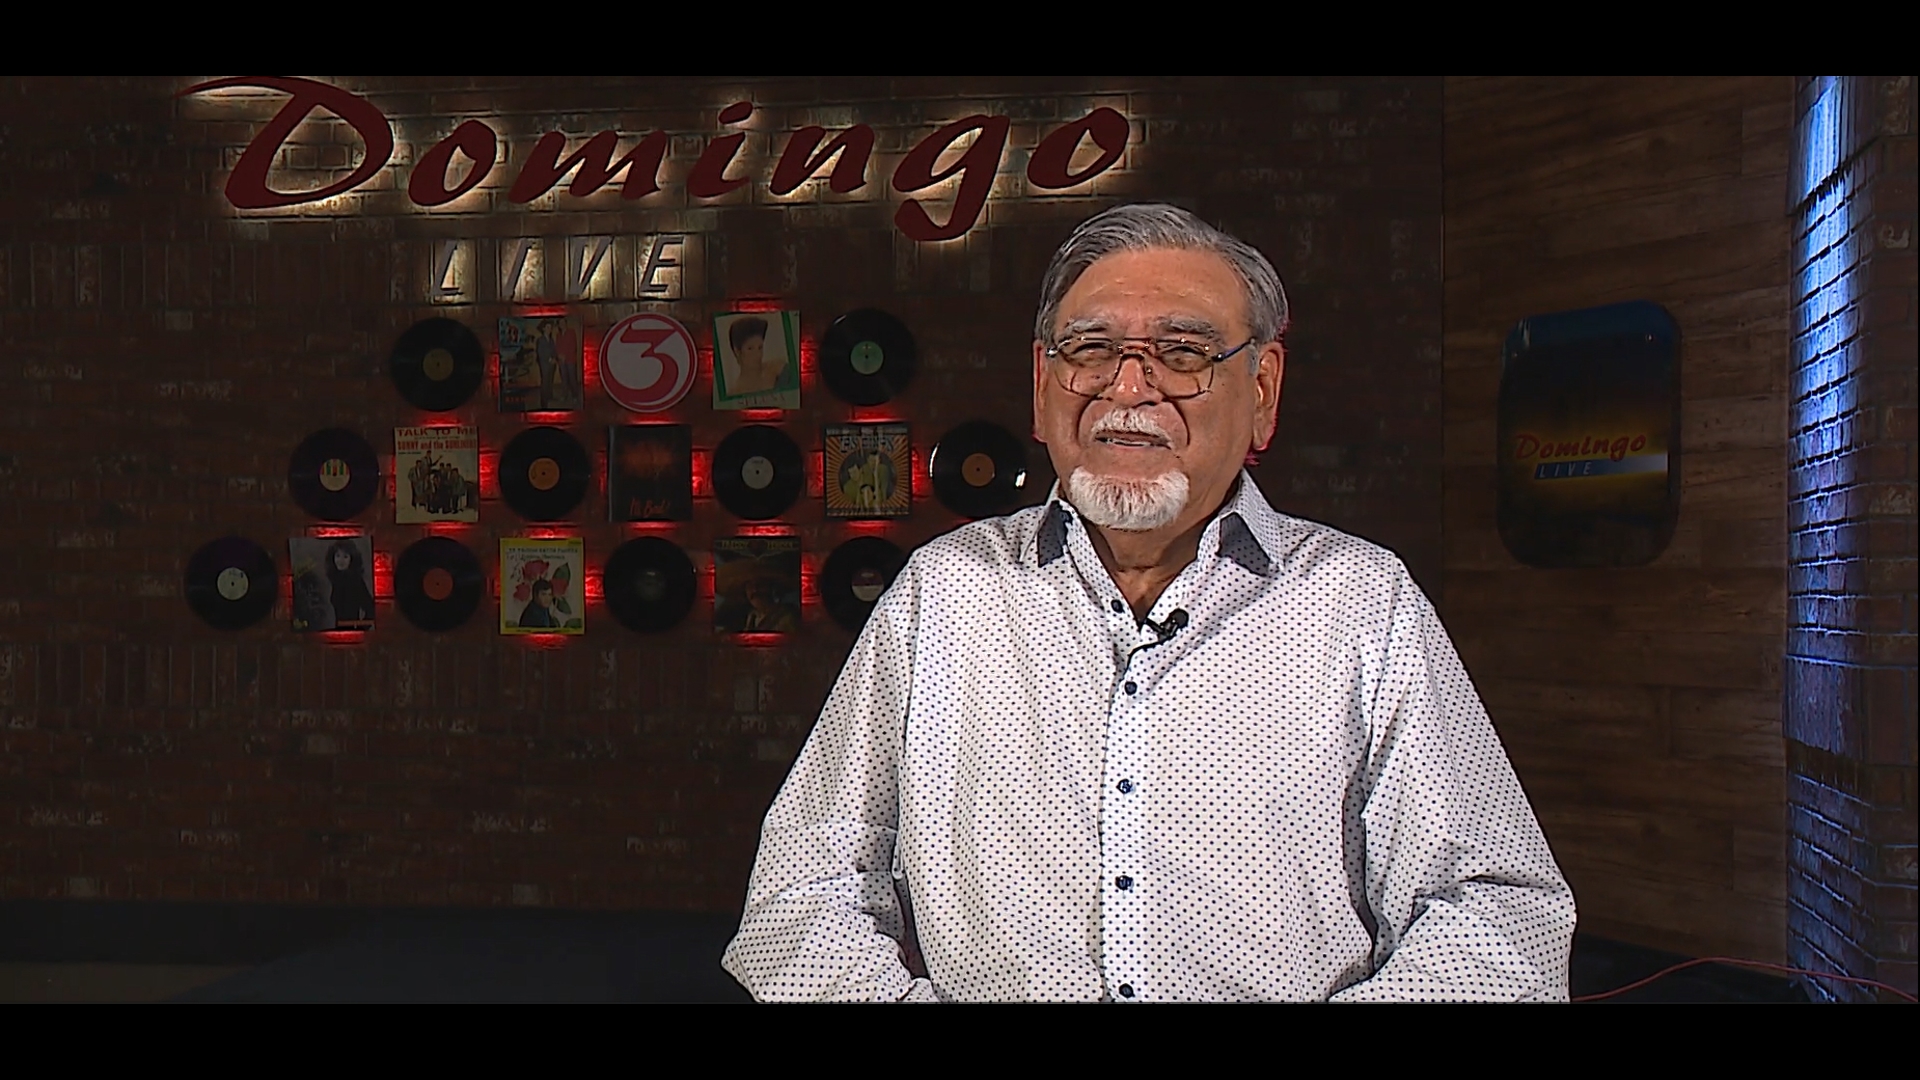 Chavez and co-host Luis Alonso Muñoz took over from show originator Domingo Peña, continuing his legacy of informing Latinos in Corpus Christi.